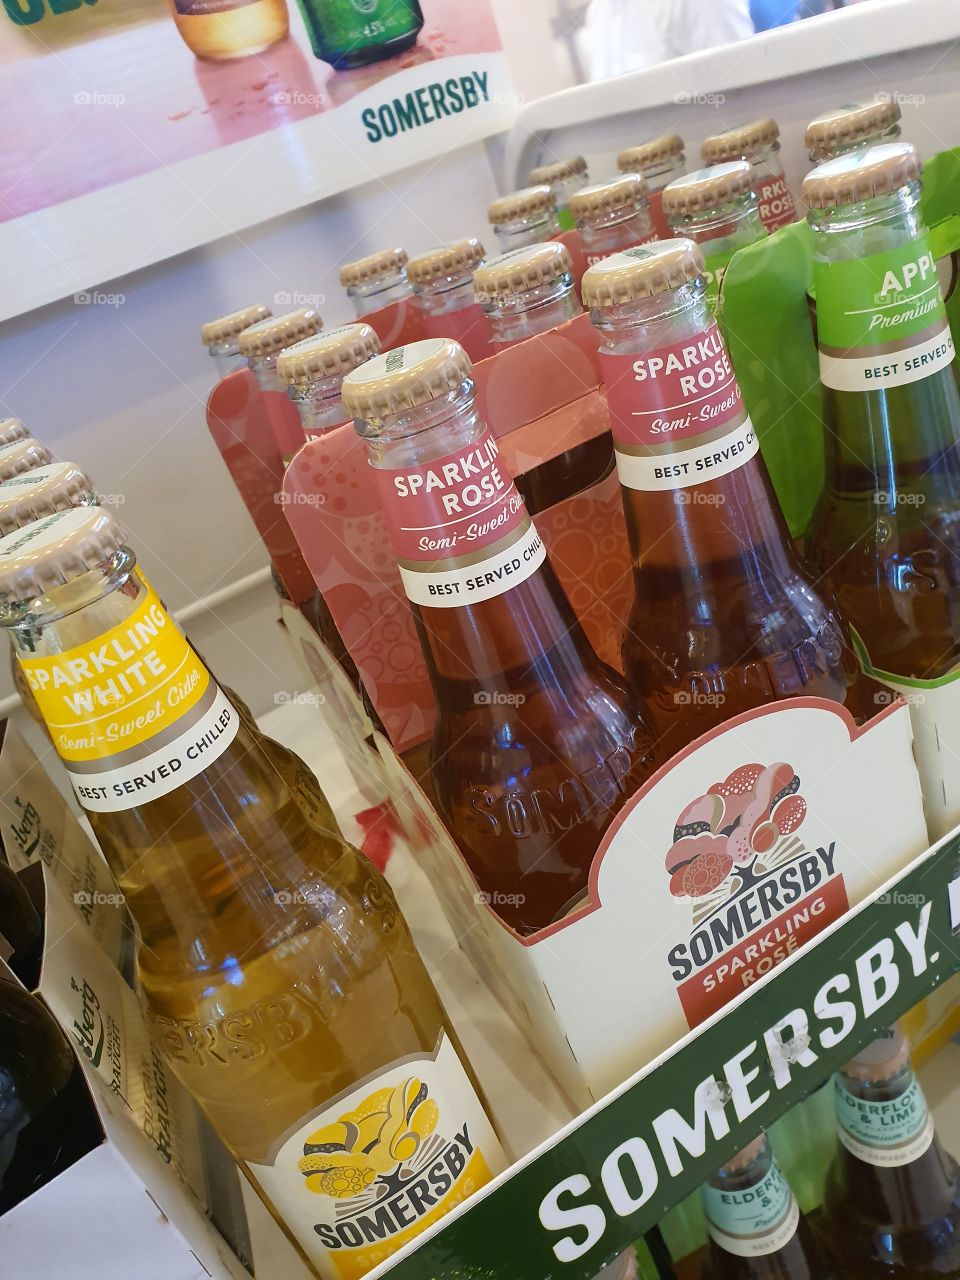 Various Favour of Somersby - Apple, Sparkling Rose and Sparkling White